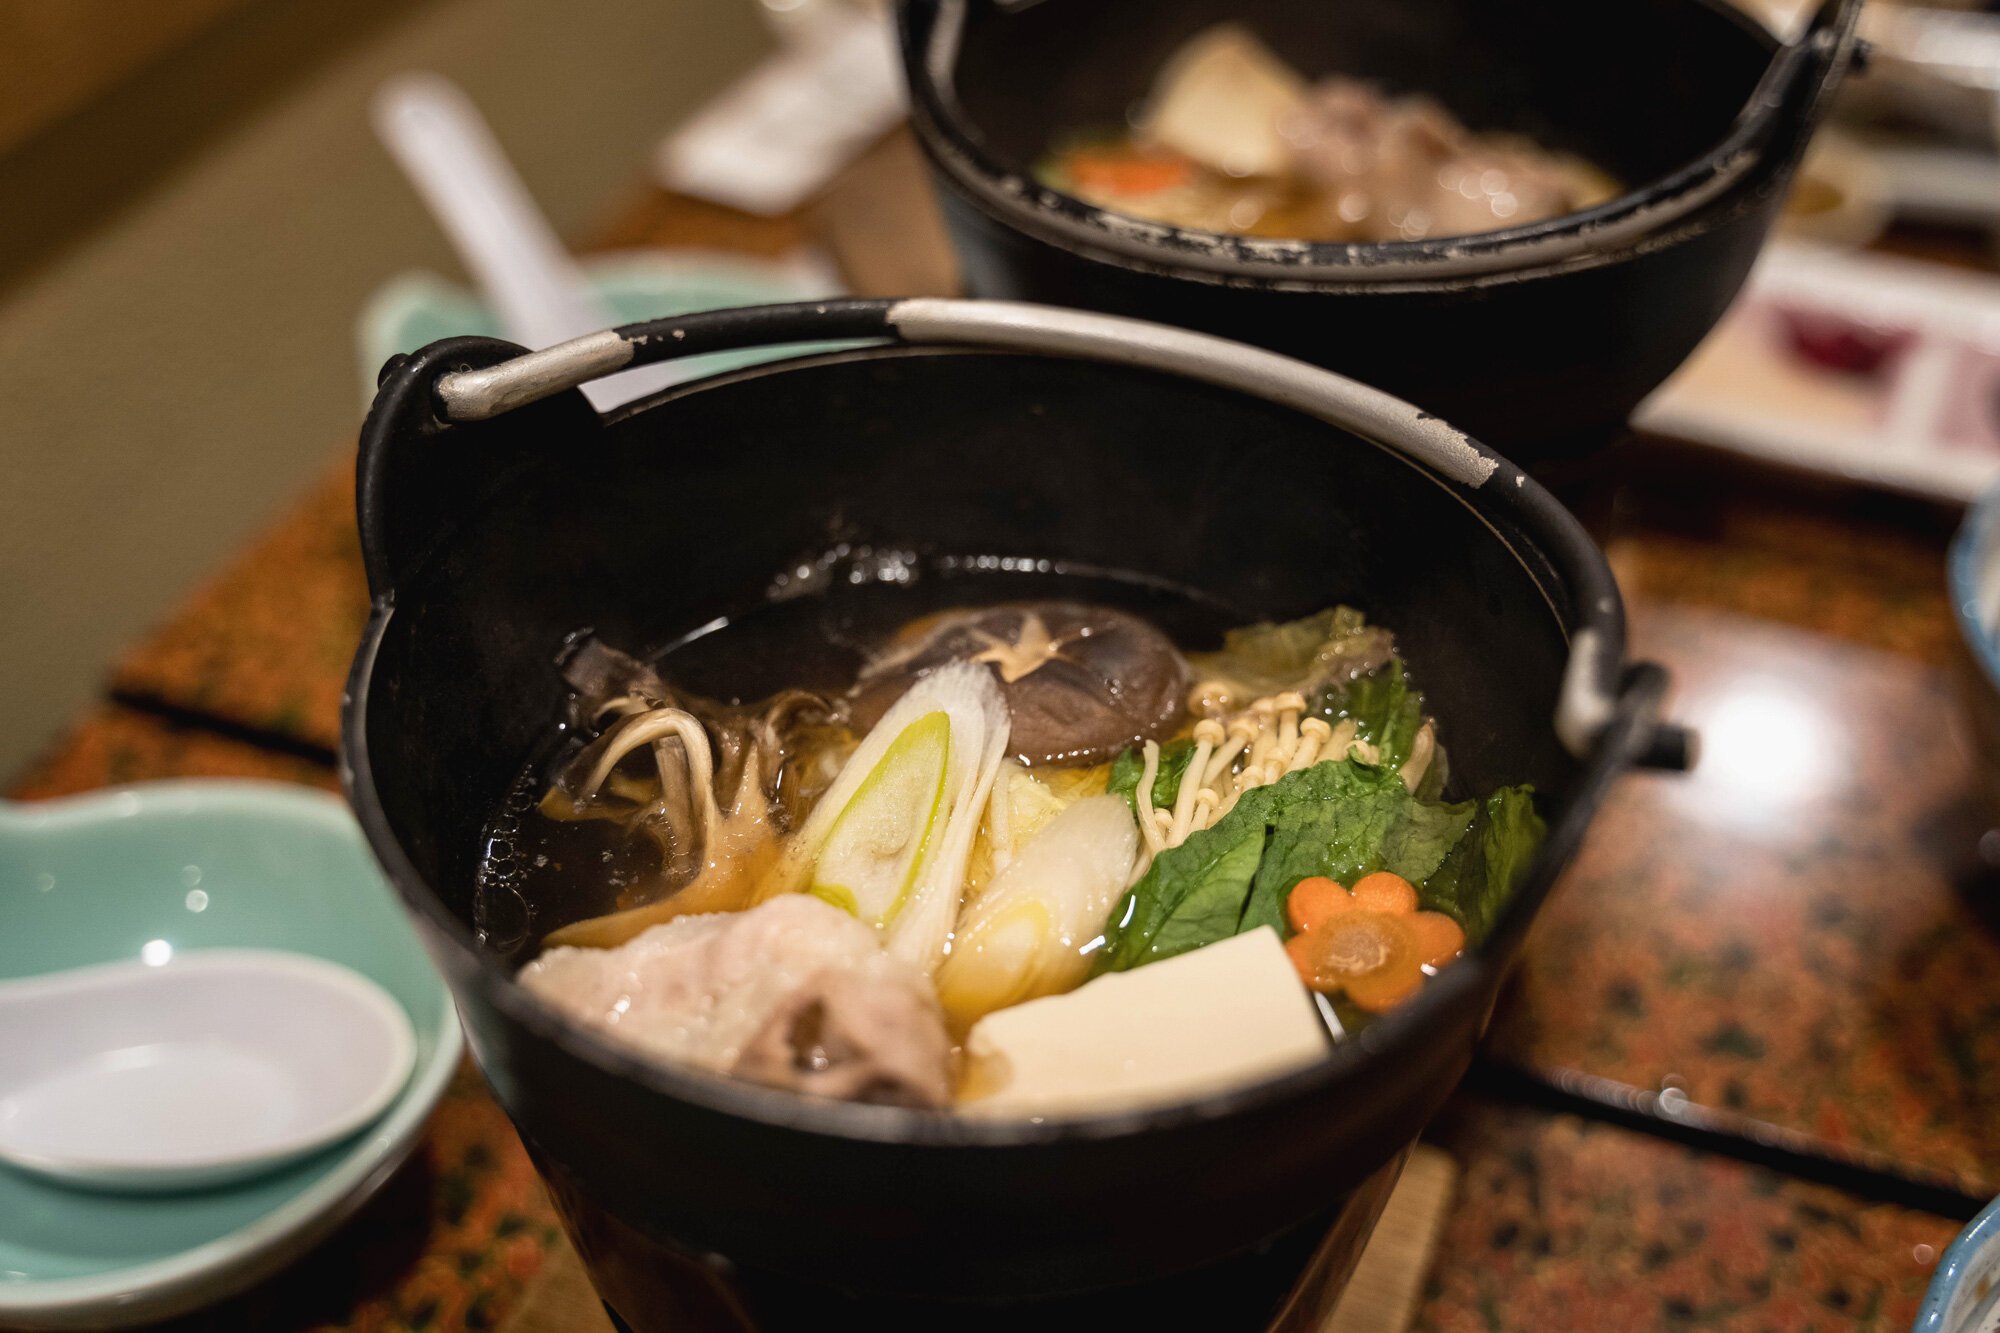 Dinner: Personal nabe (hot pot)